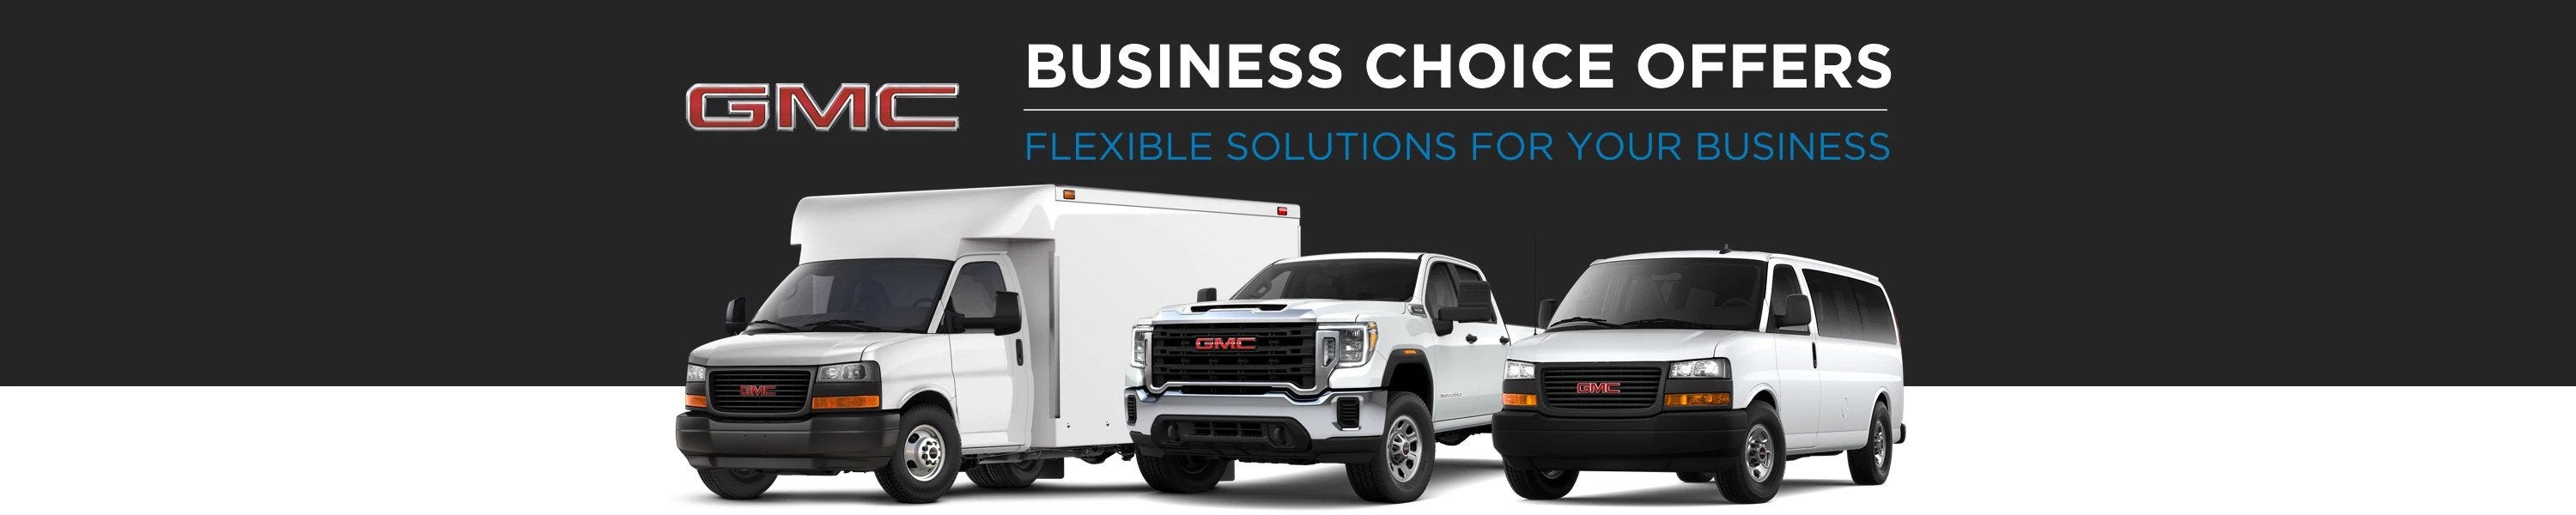 GMC Business Choice Offers - Flexible Solutions for your Business - Schepel Buick GMC in Merrillville IN